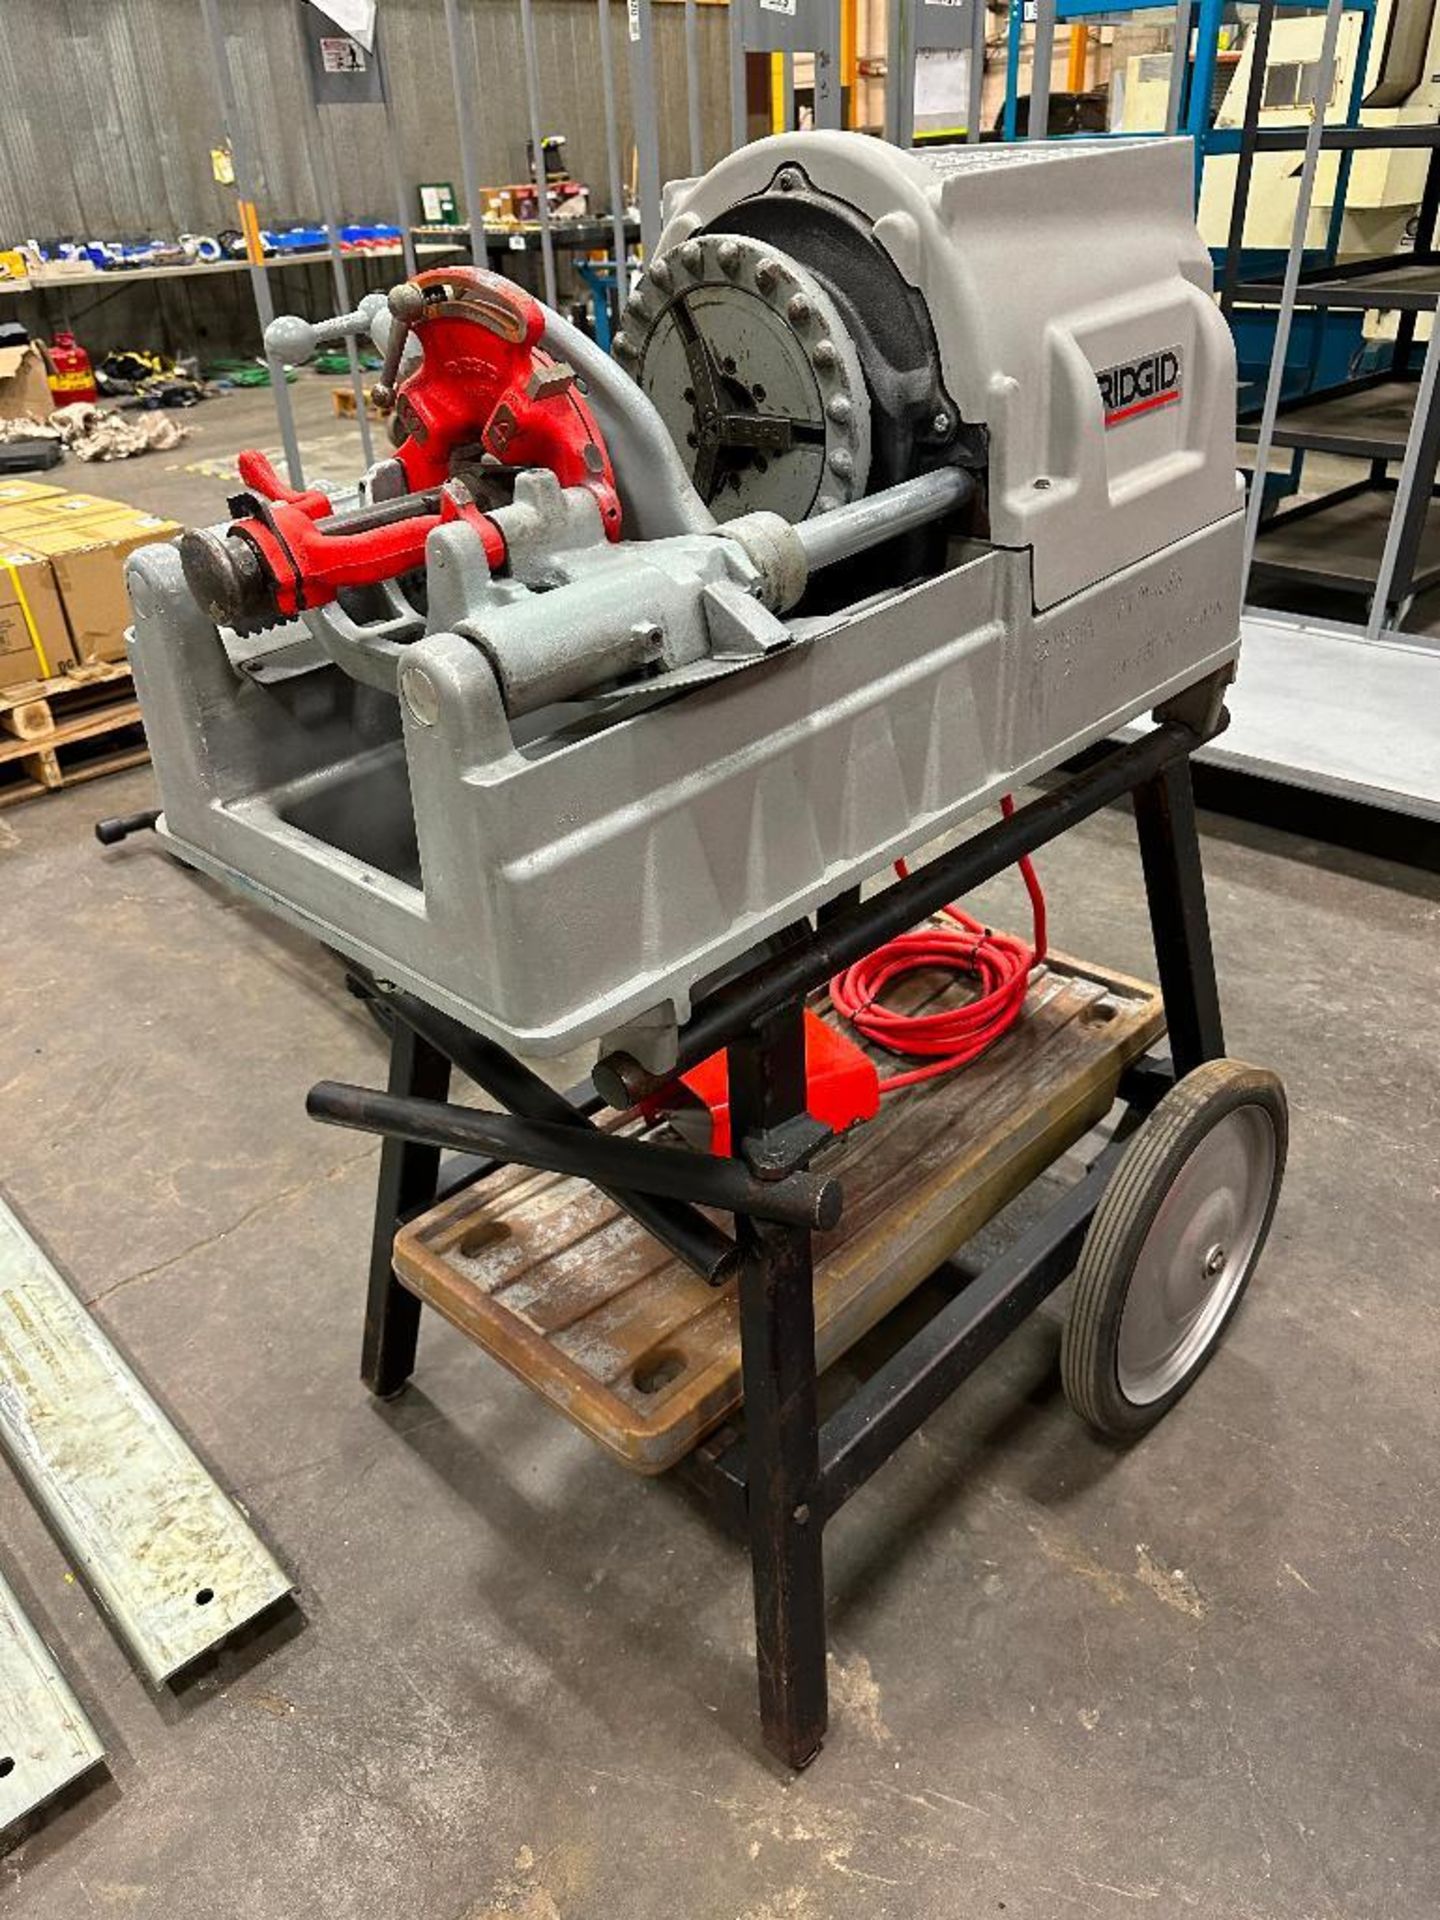 Ridgid 535 Manual Chuck Threader w/ Cutter, Reamer, Foot Pedal, Mobile Stand, Die Head, etc. - Image 5 of 9